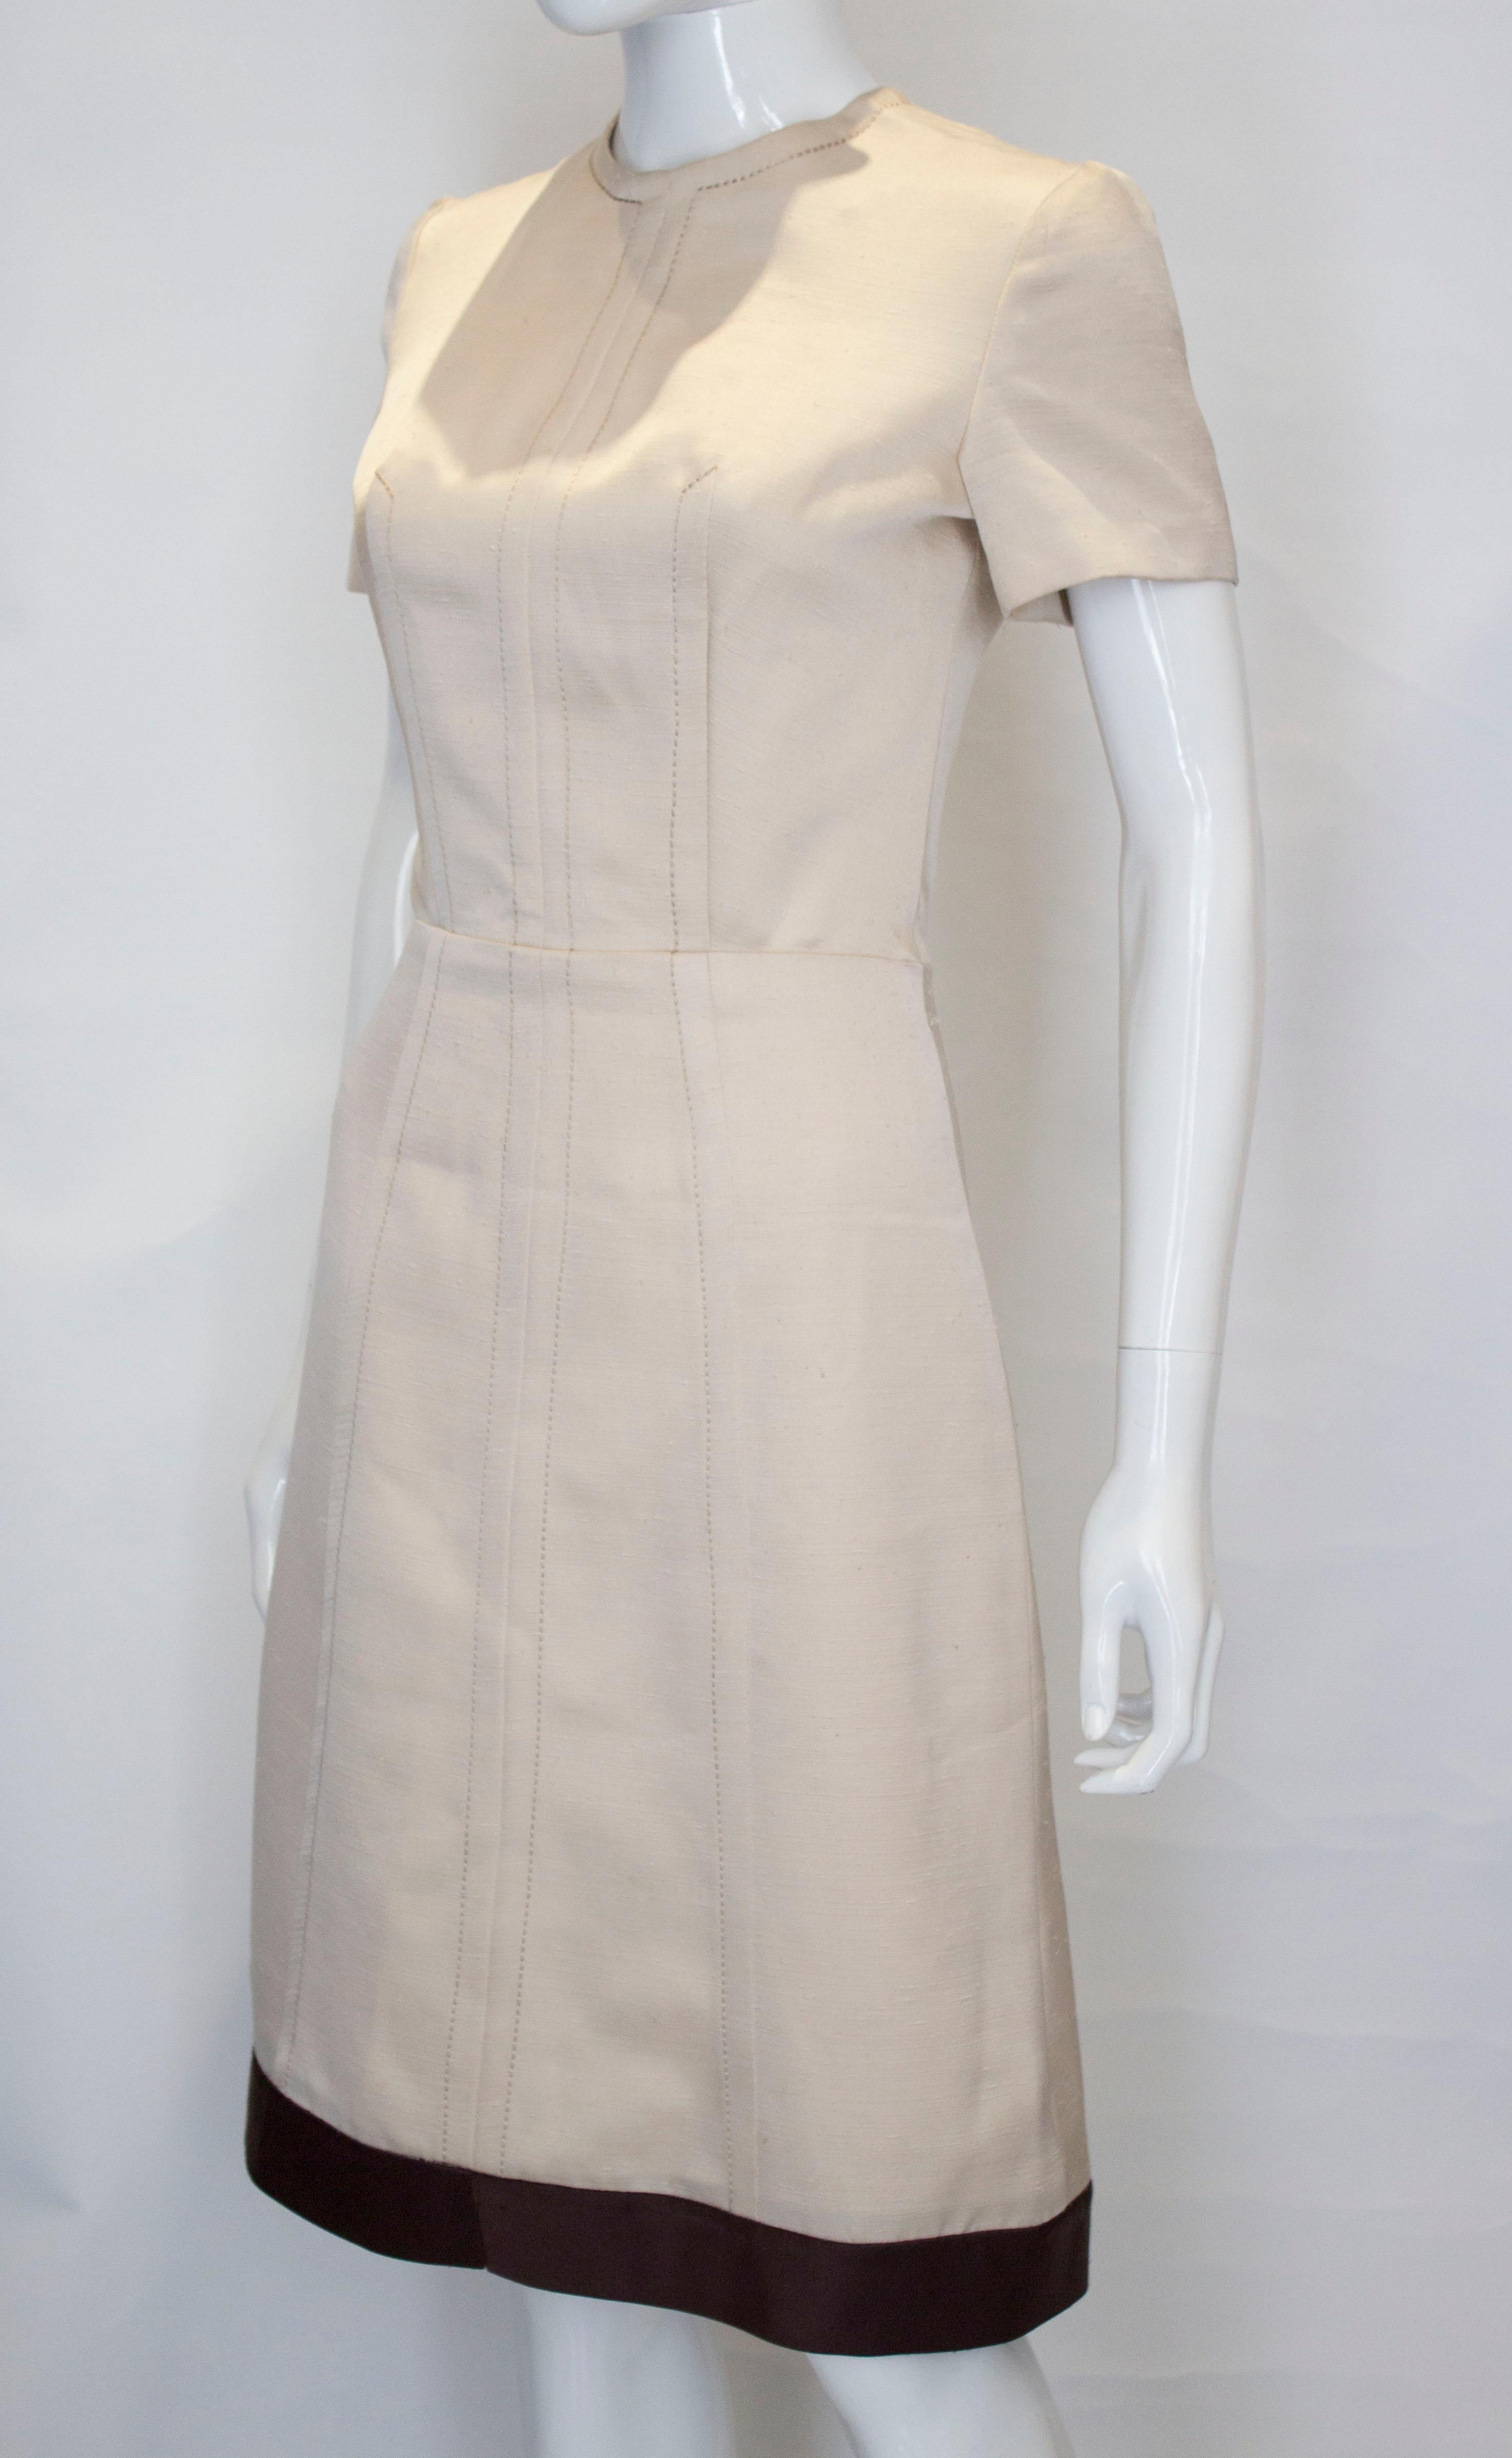 Beige A vintage 1950s - 1960s cream fitted raw silk dress small